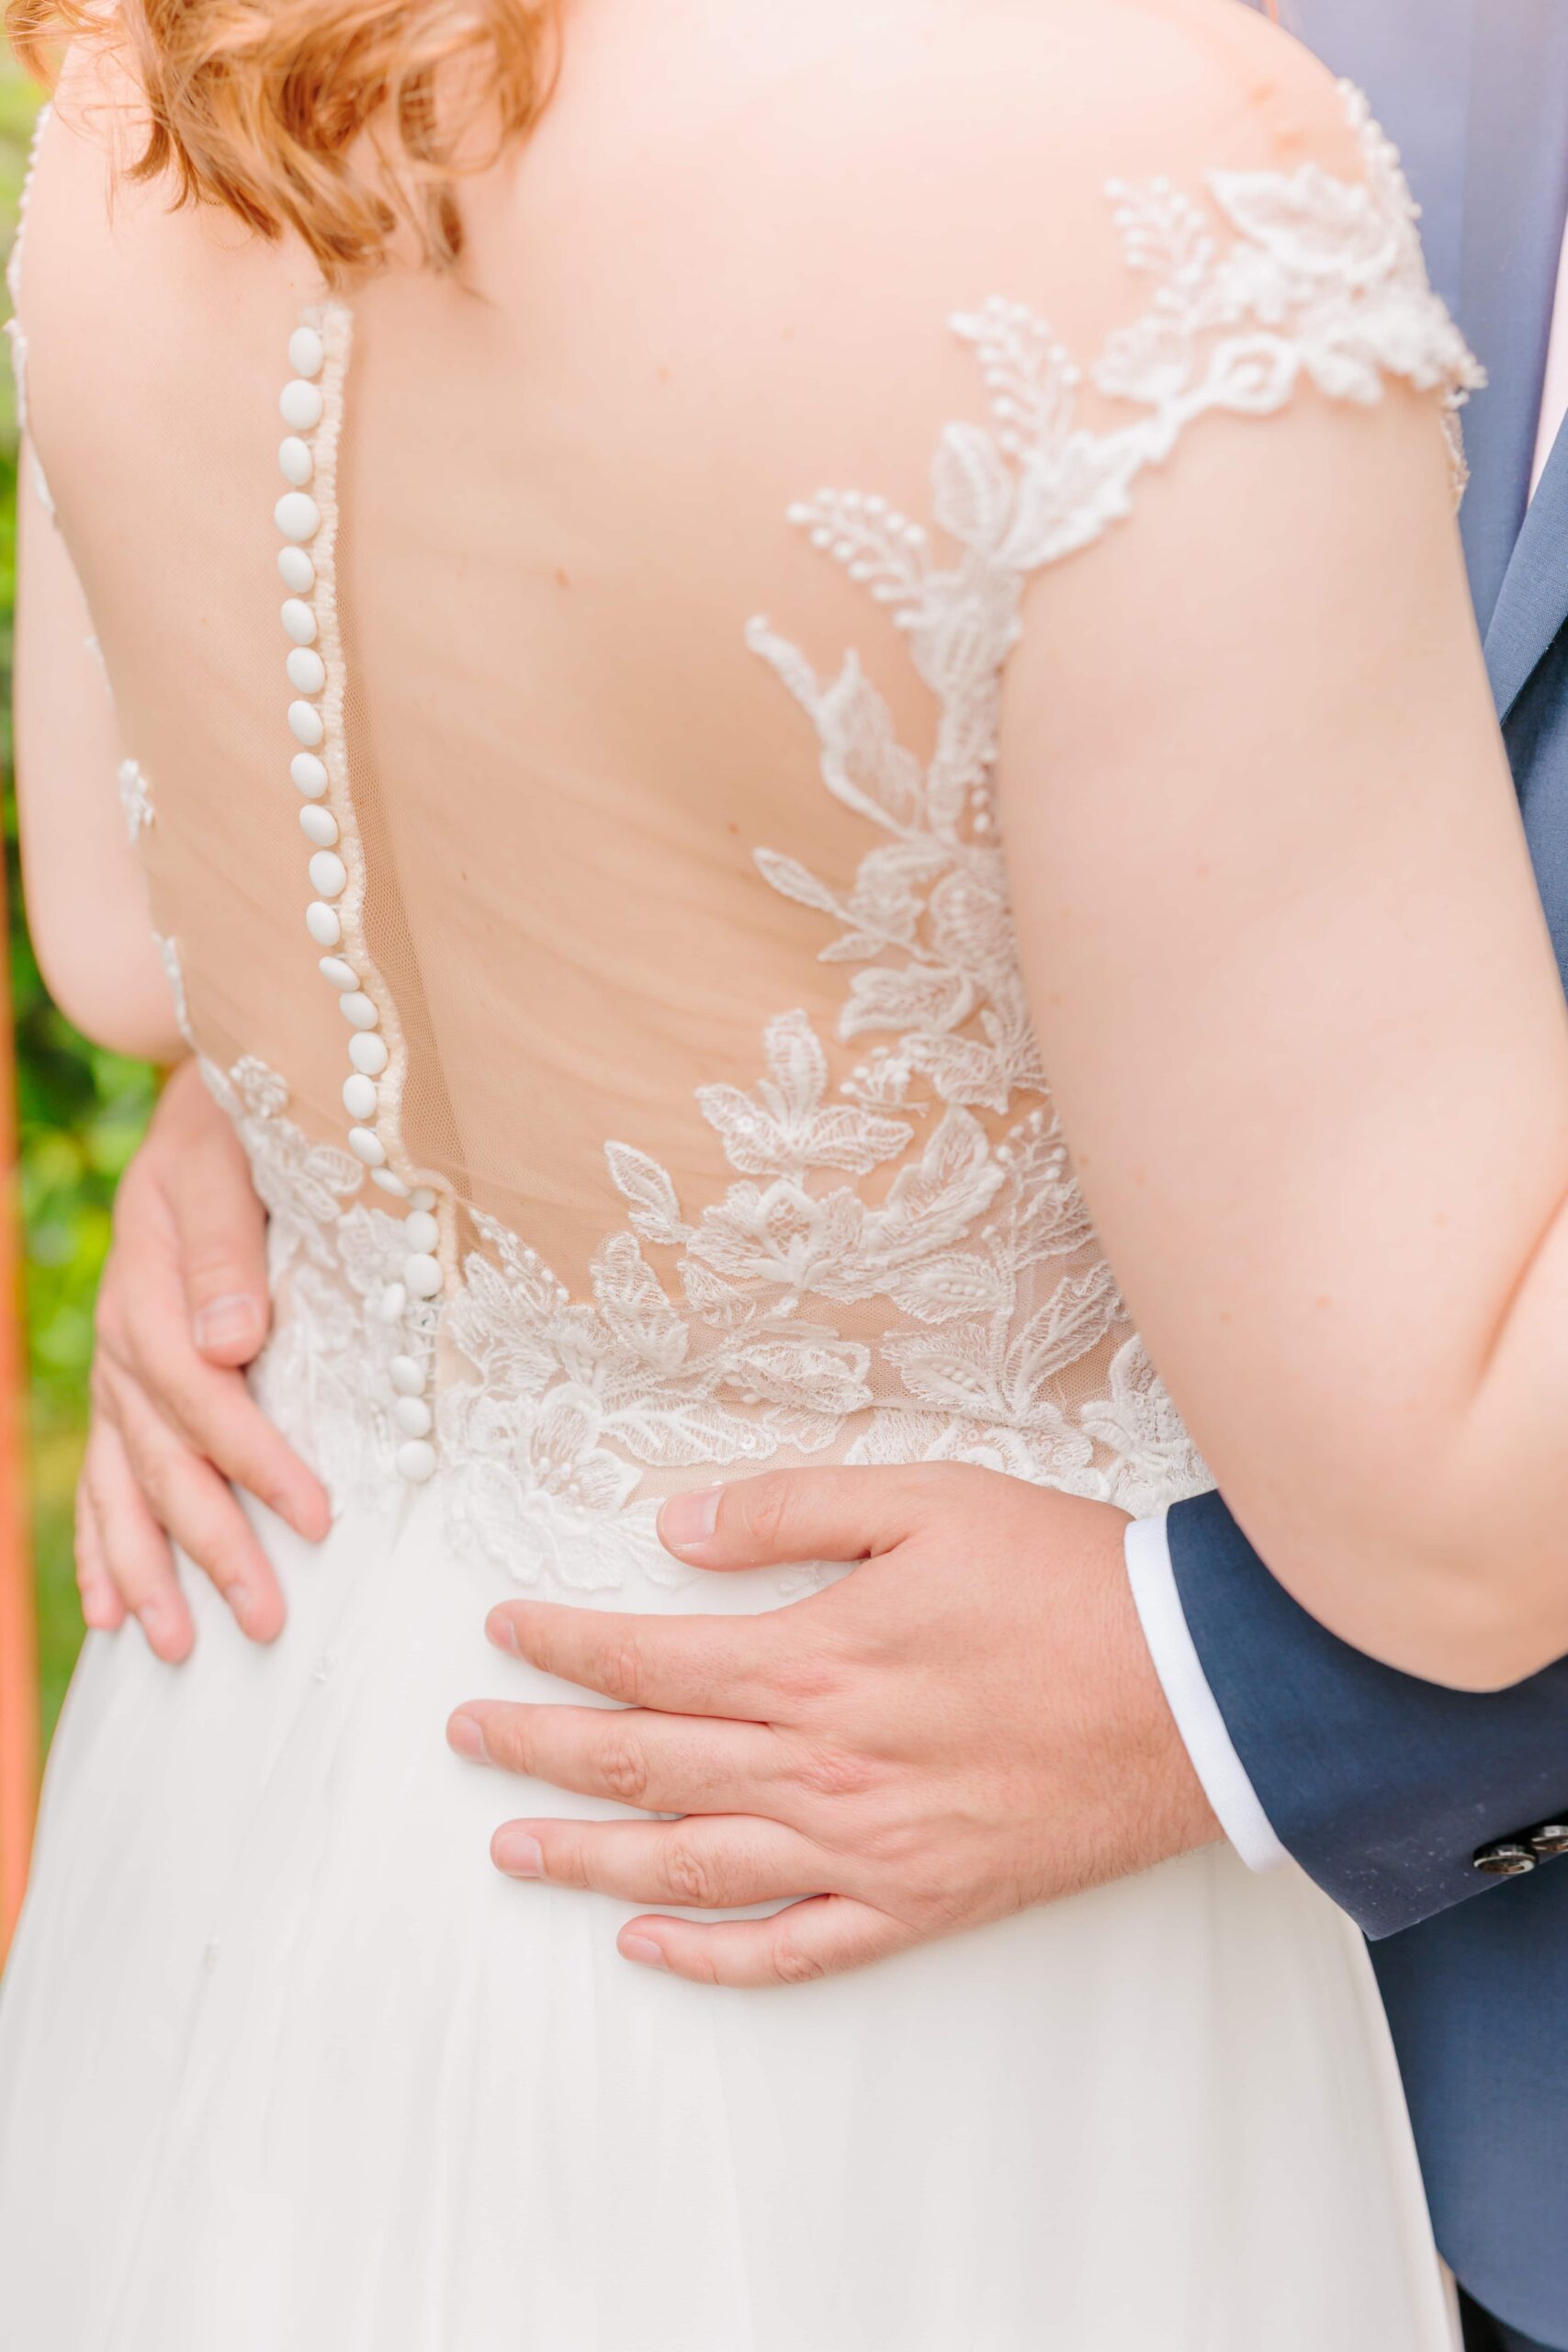 Intricate lace details adorn the back of this bride's dress as she waits for her Greensboro wedding to begin.